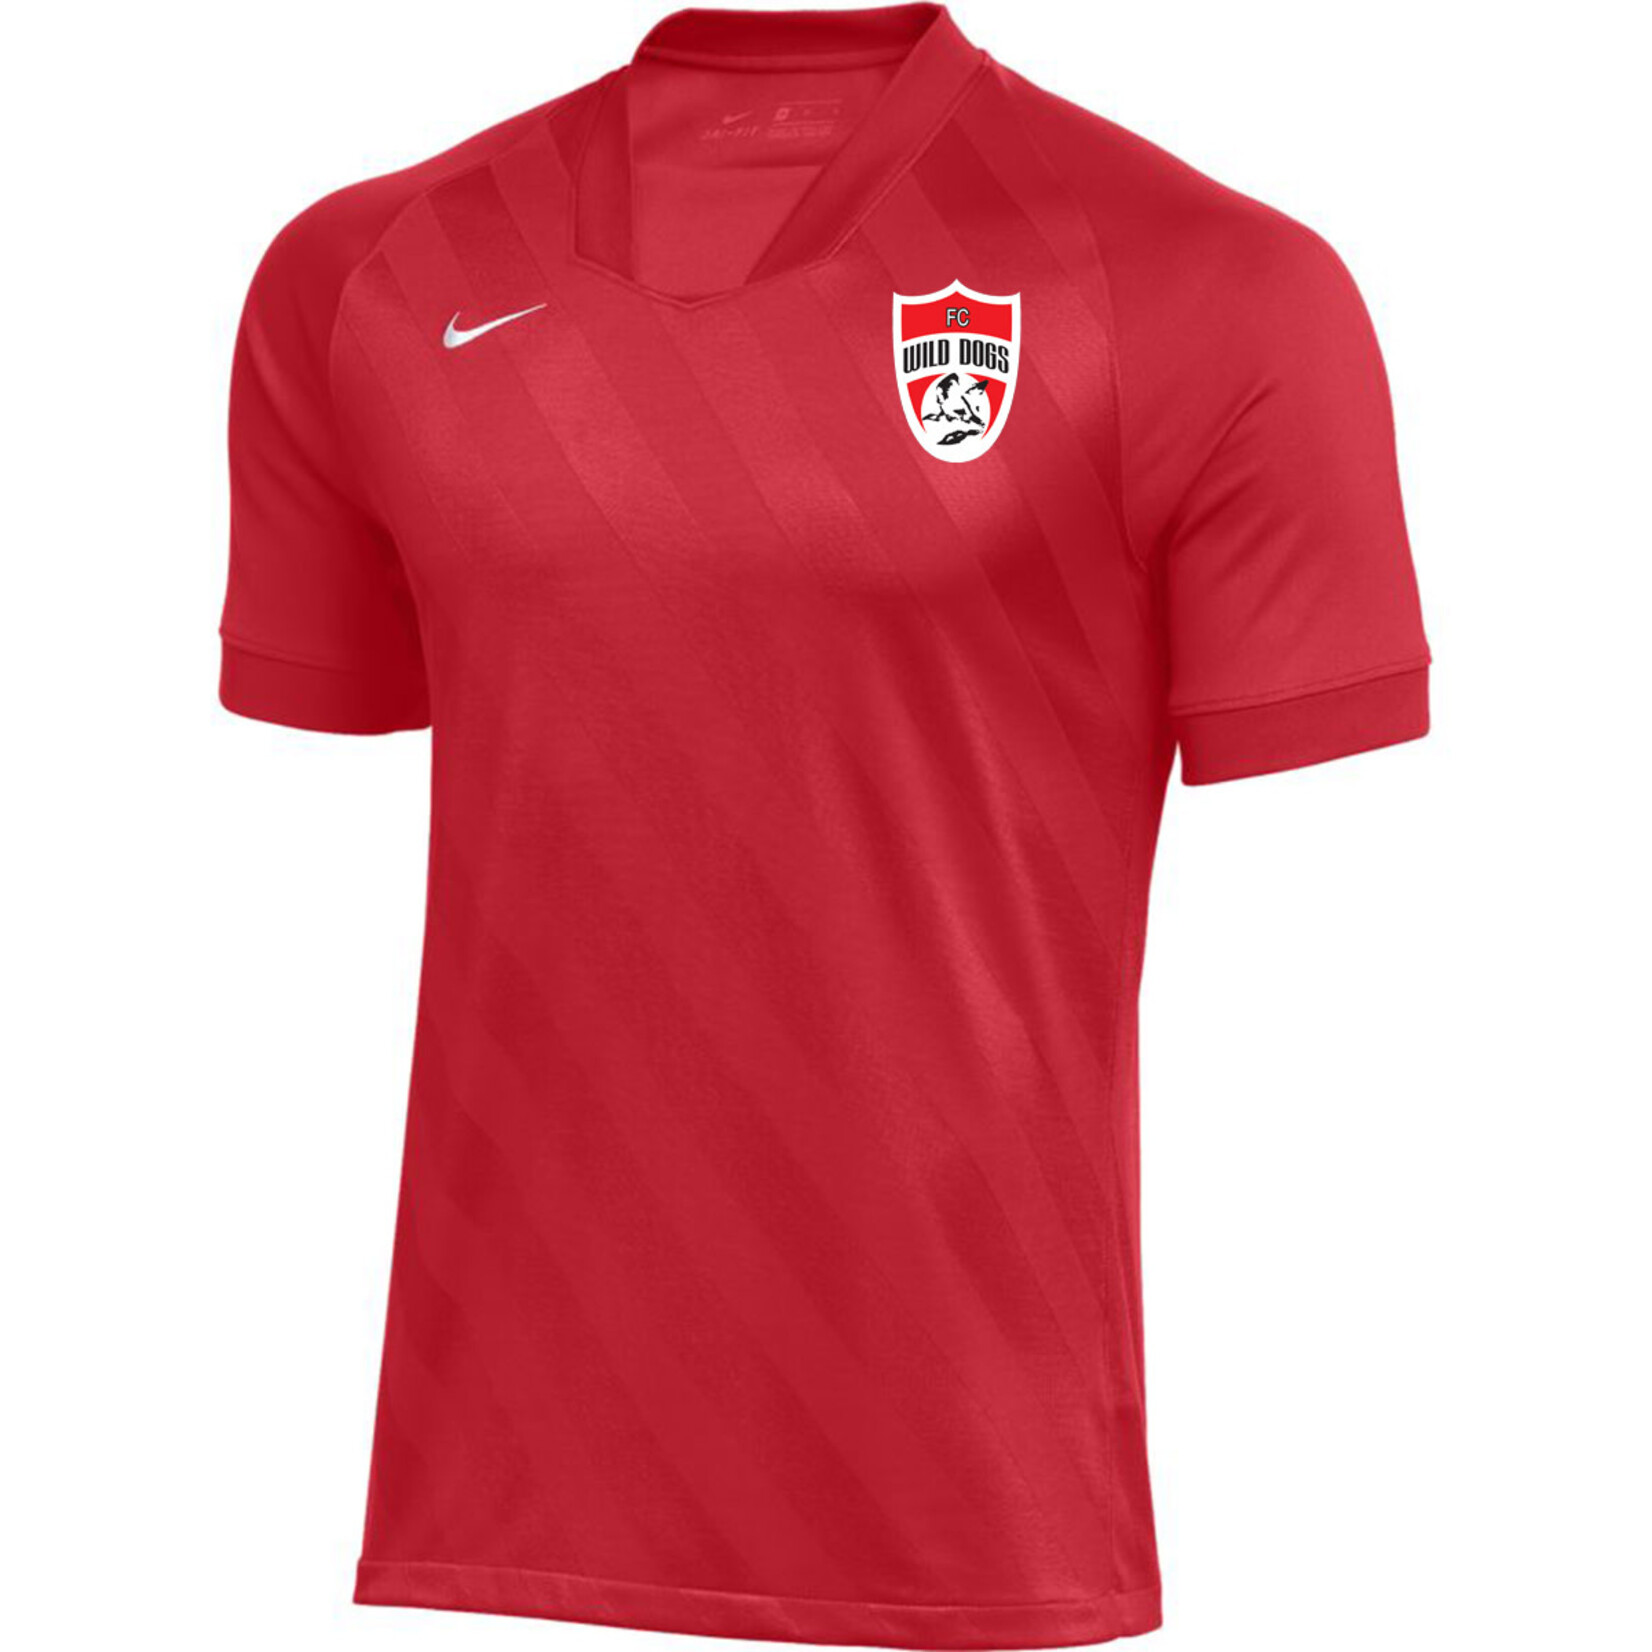 NIKE WILD DOGS CHALLENGE III JERSEY (RED)